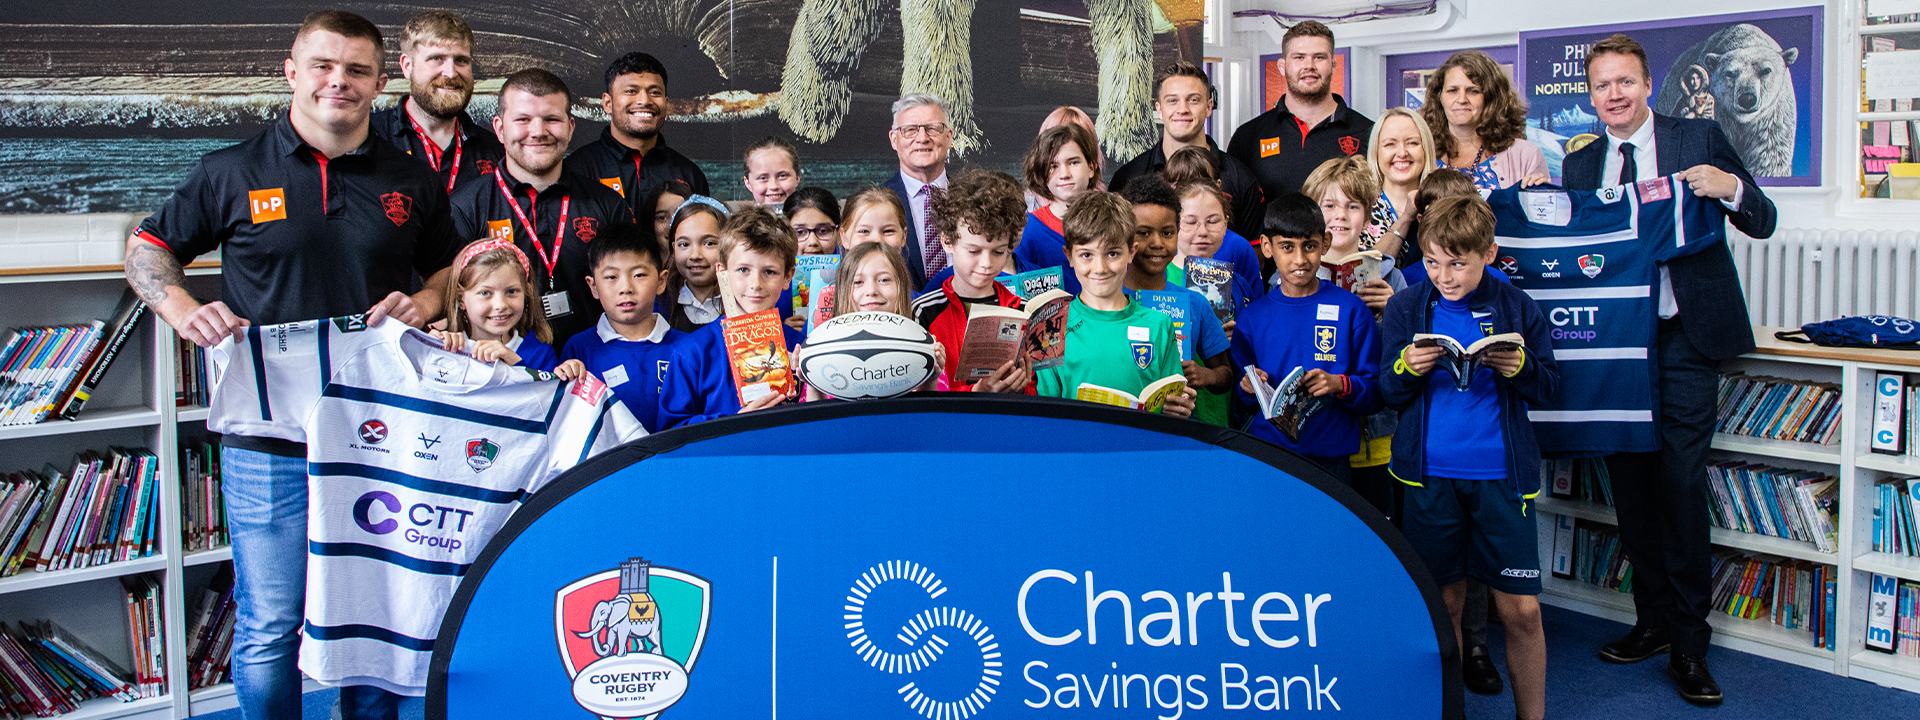 charter savings bank rugby players and colmore school children with banners and t shirts